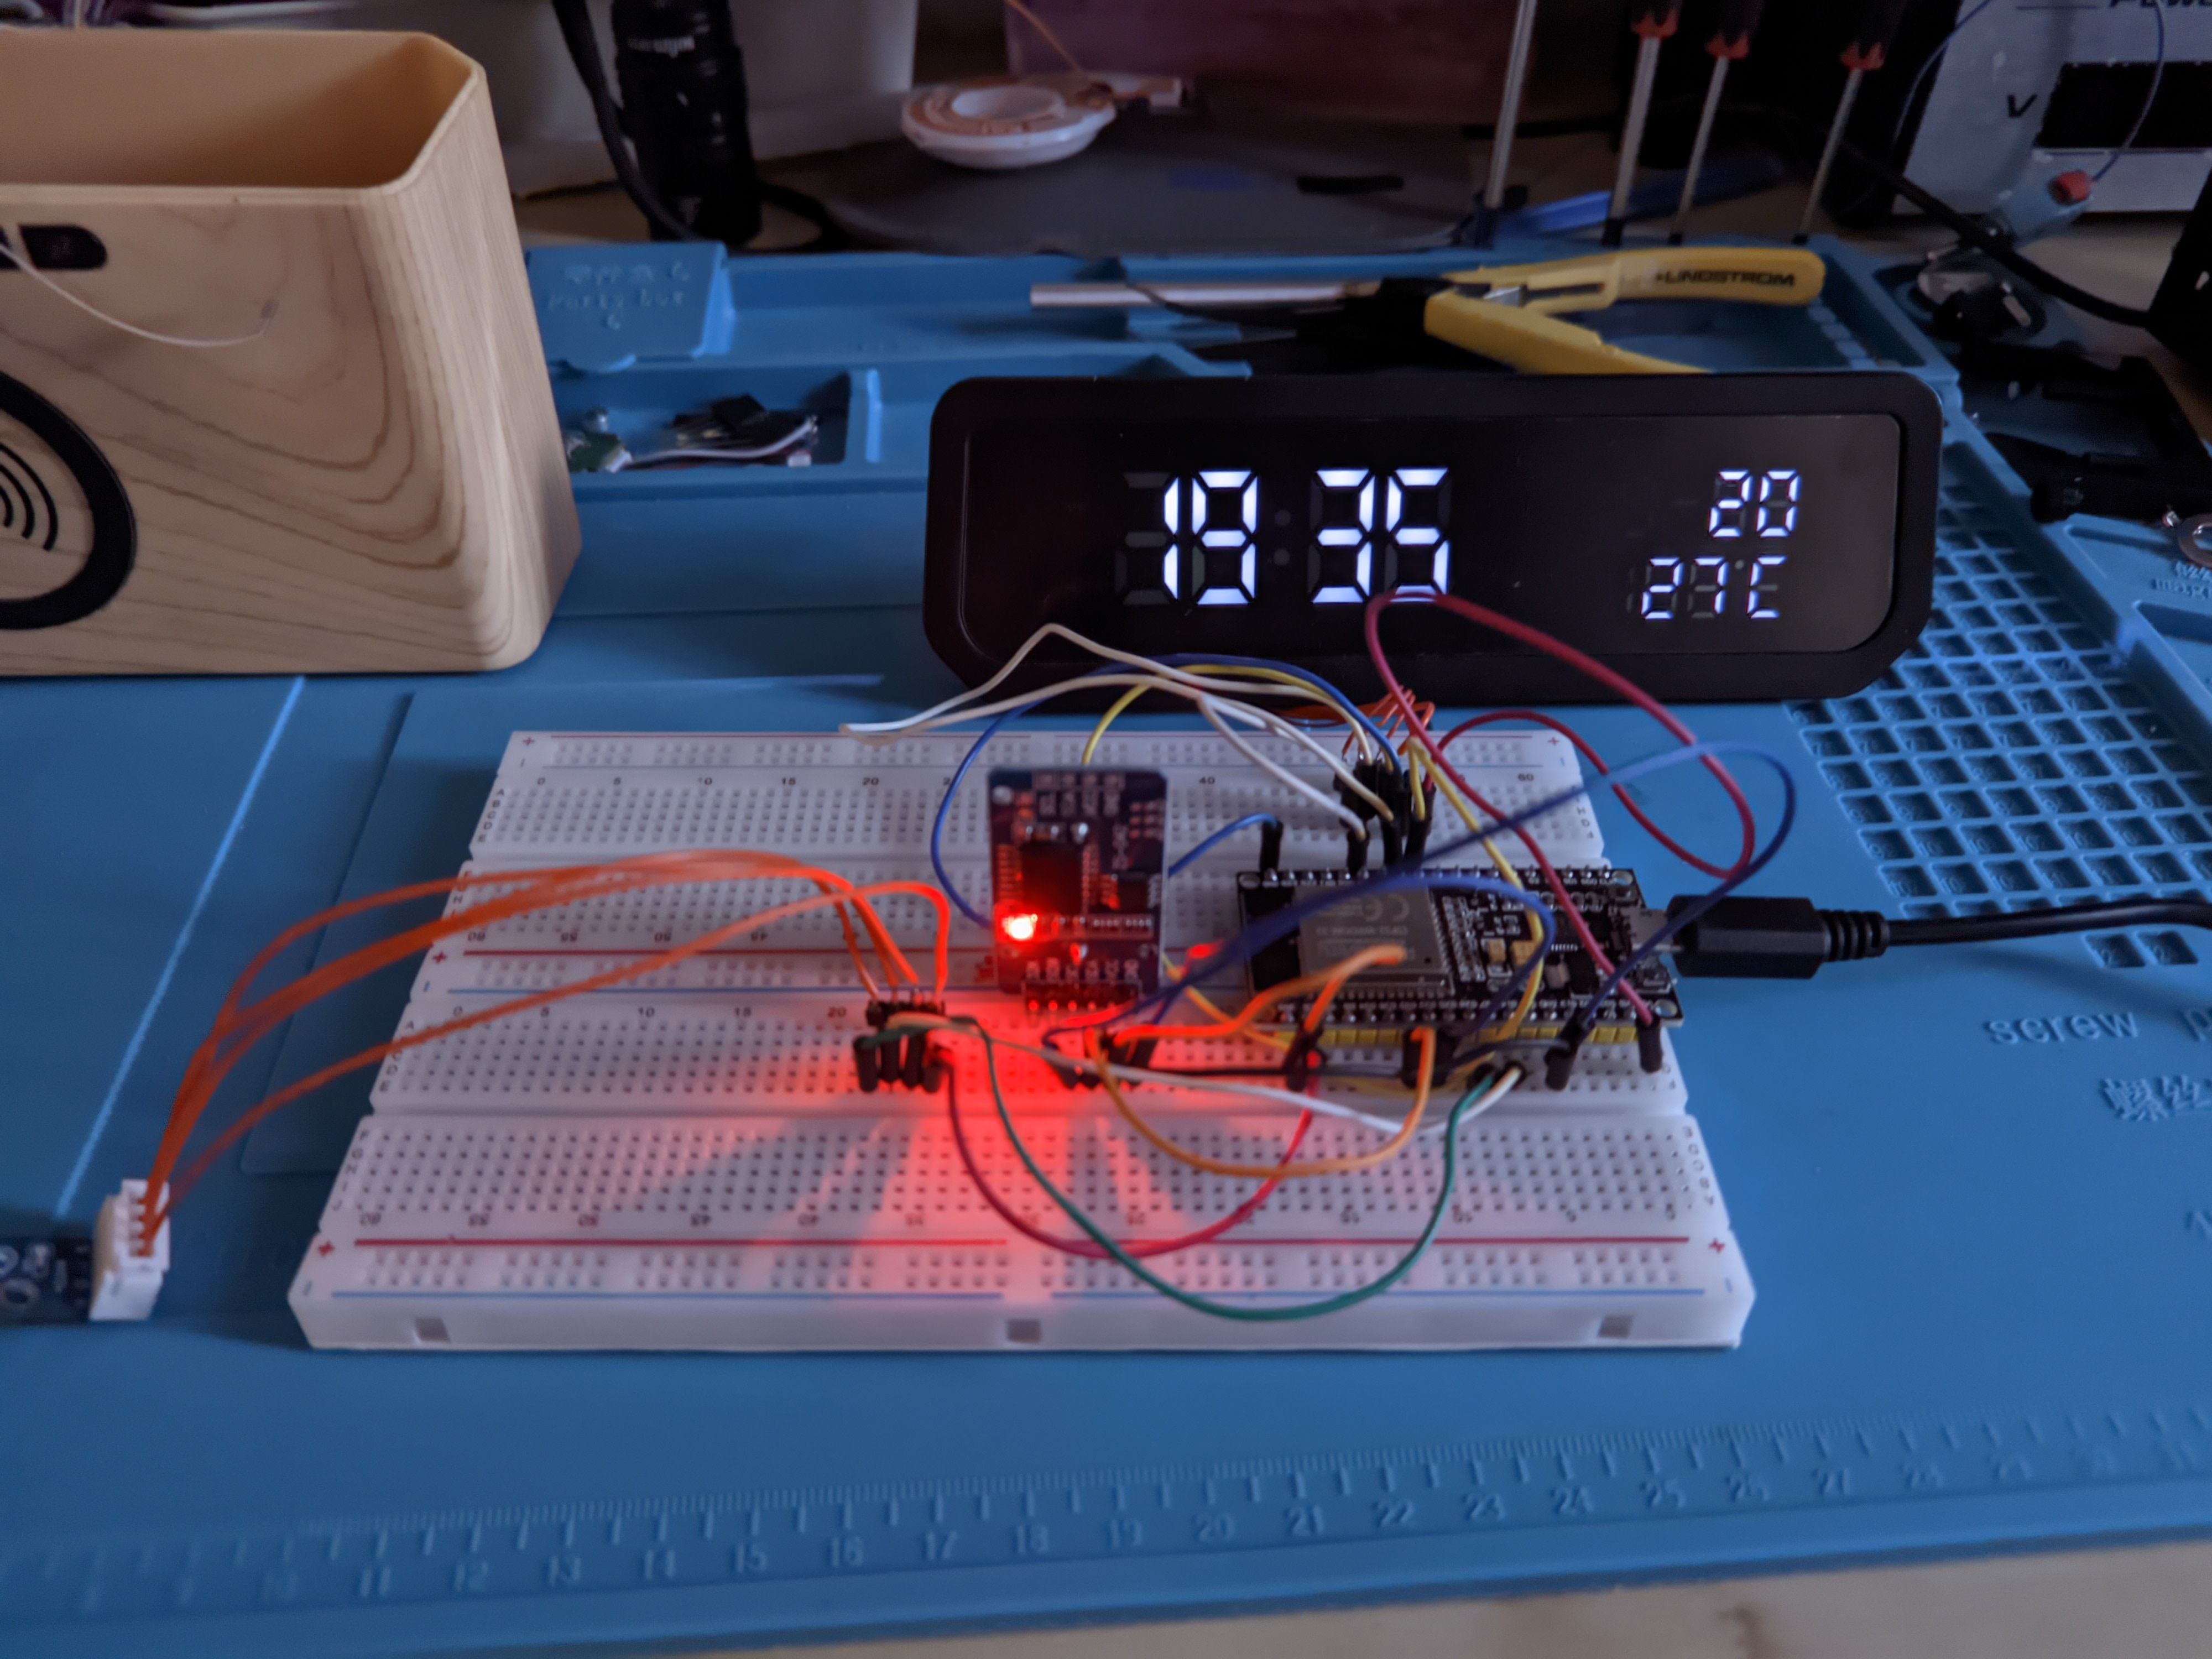 A black clock display with white 7-segment LEDs showing 19:35 and 27°C summer temperatures next to a breadboard.